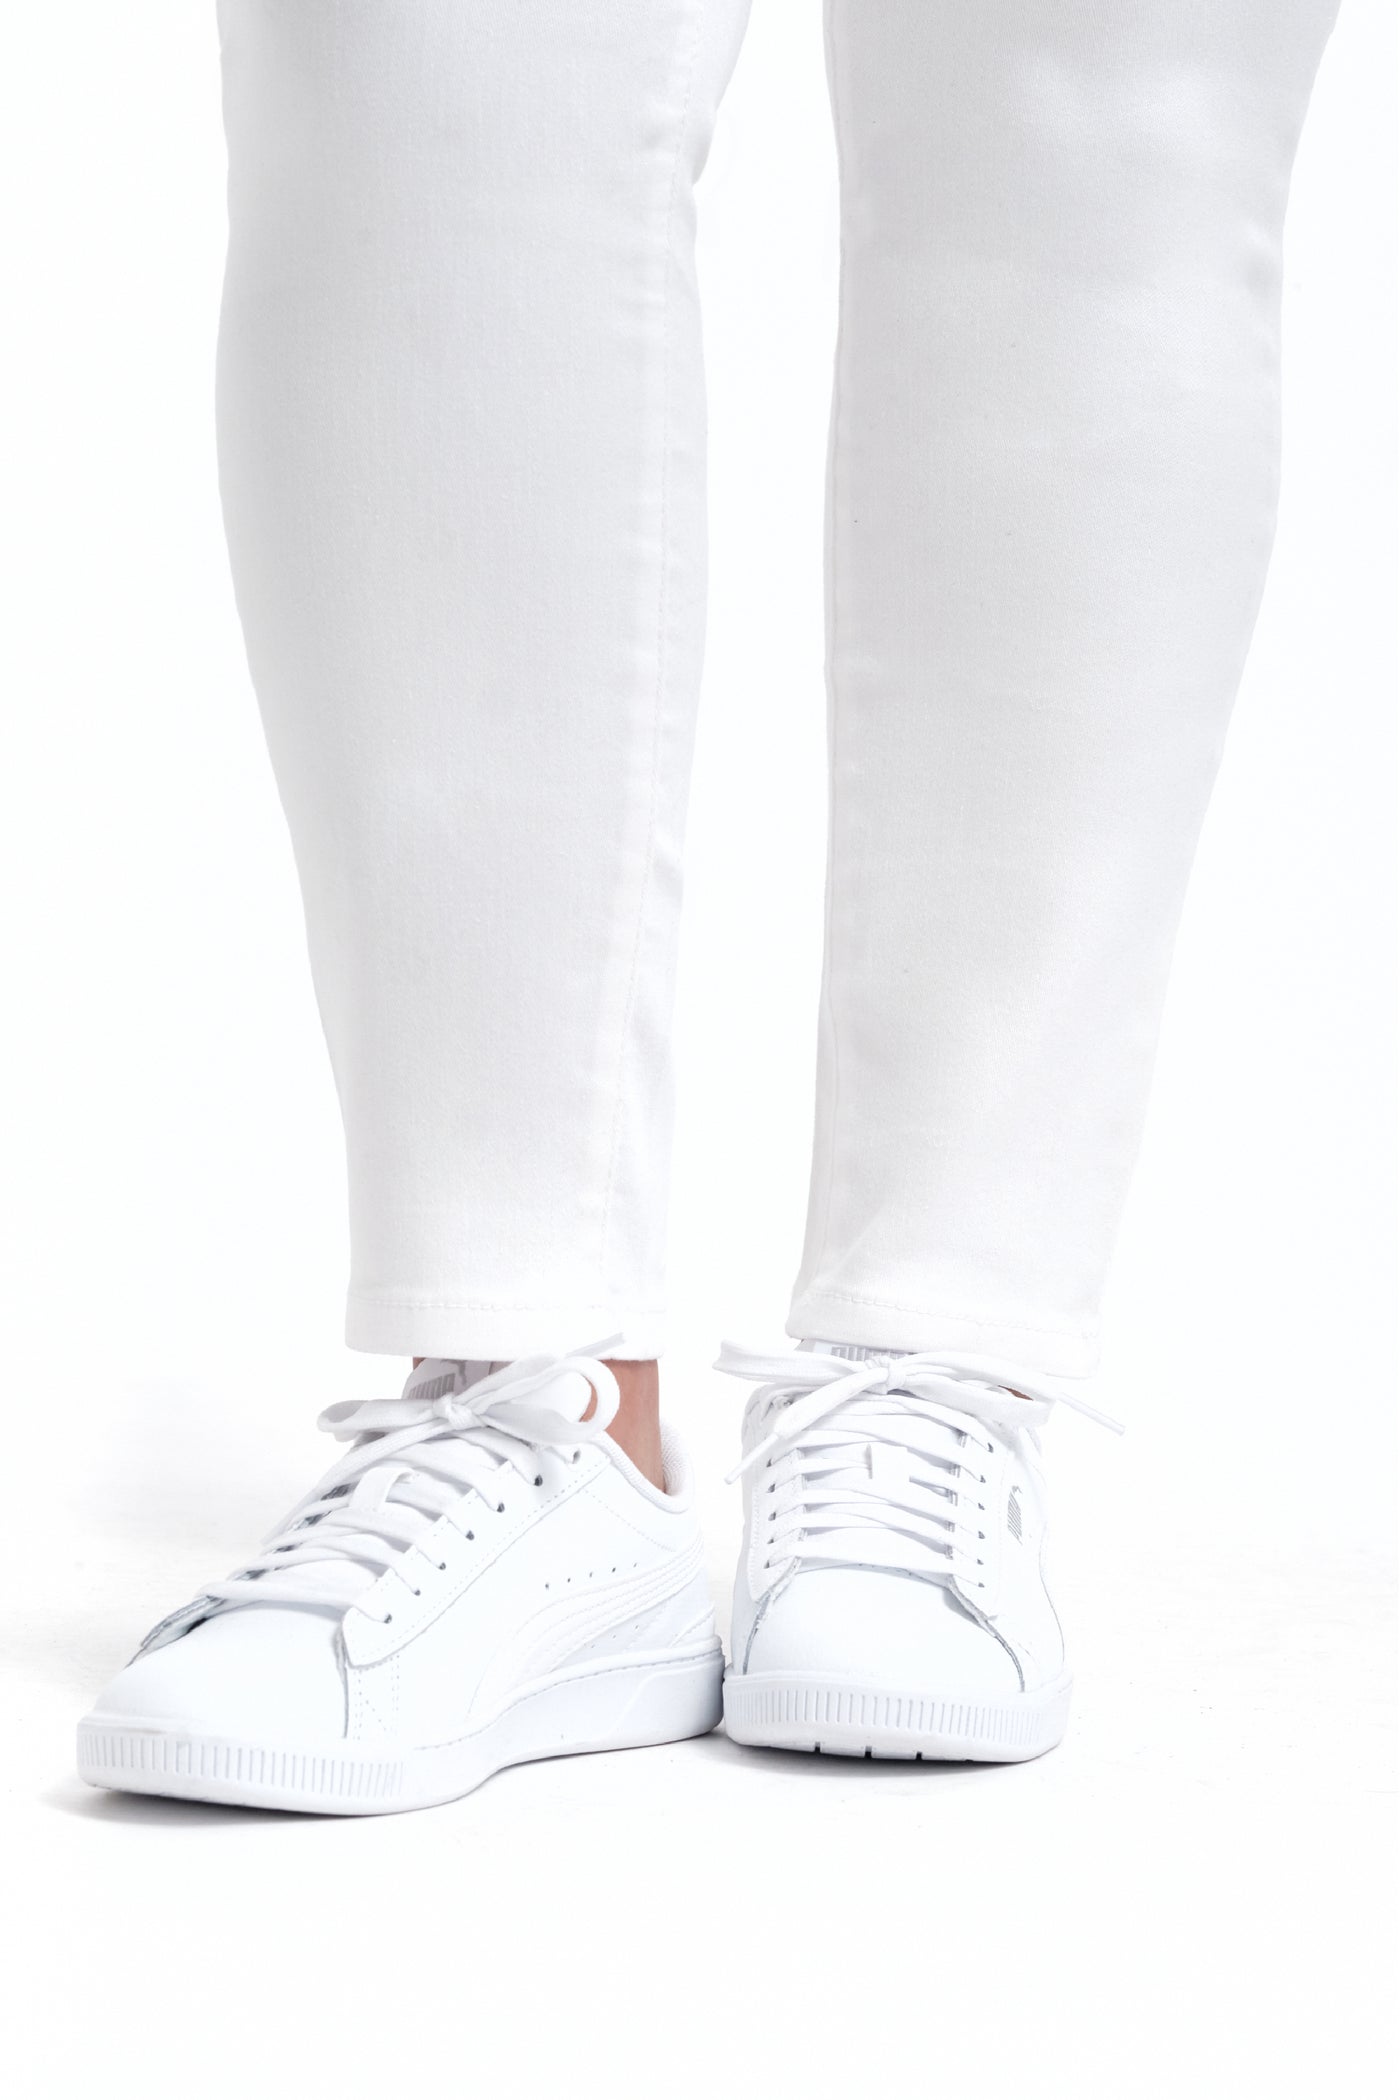 Curvy Butter Ankle Skinny in White